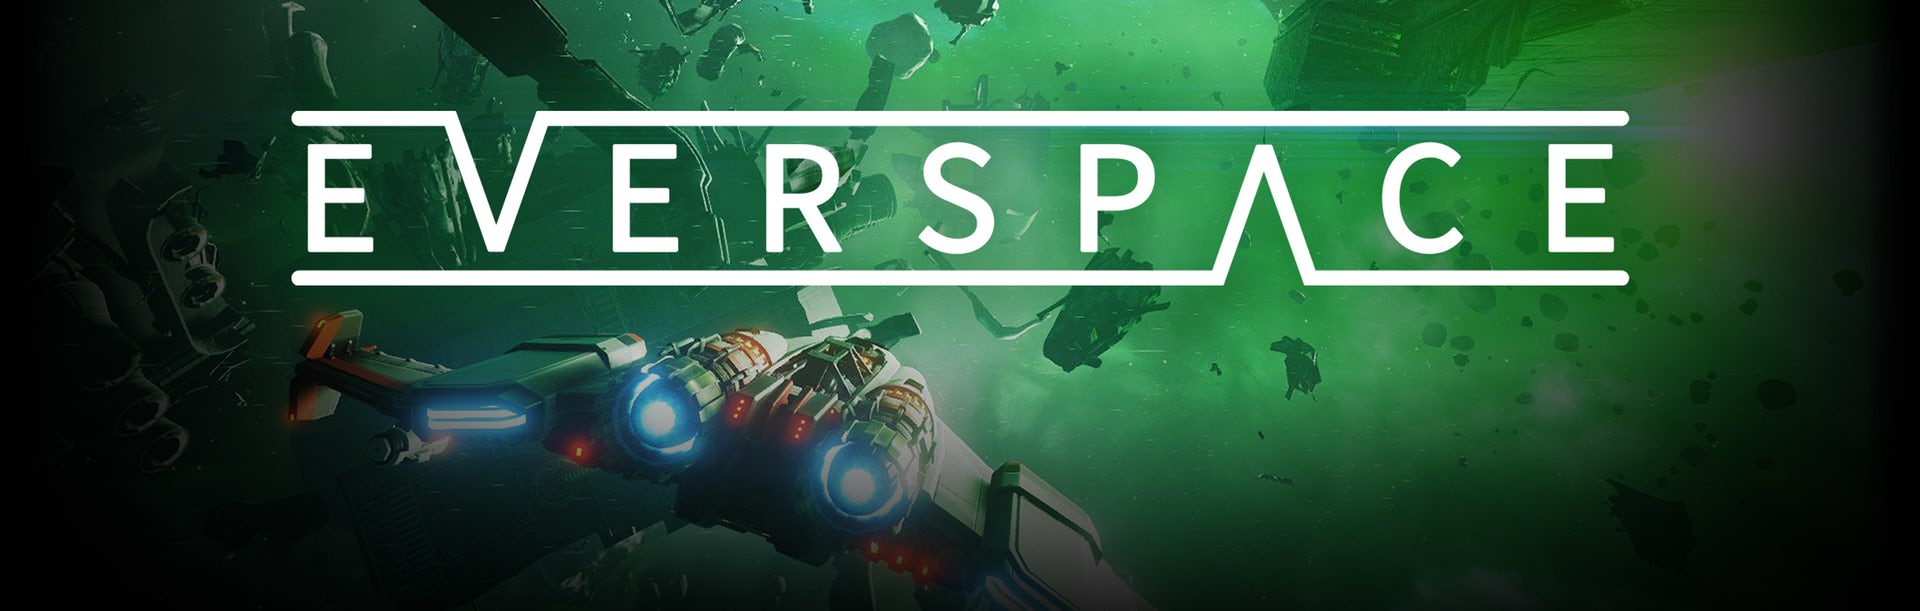 Everspace para Steam solo 4,6€